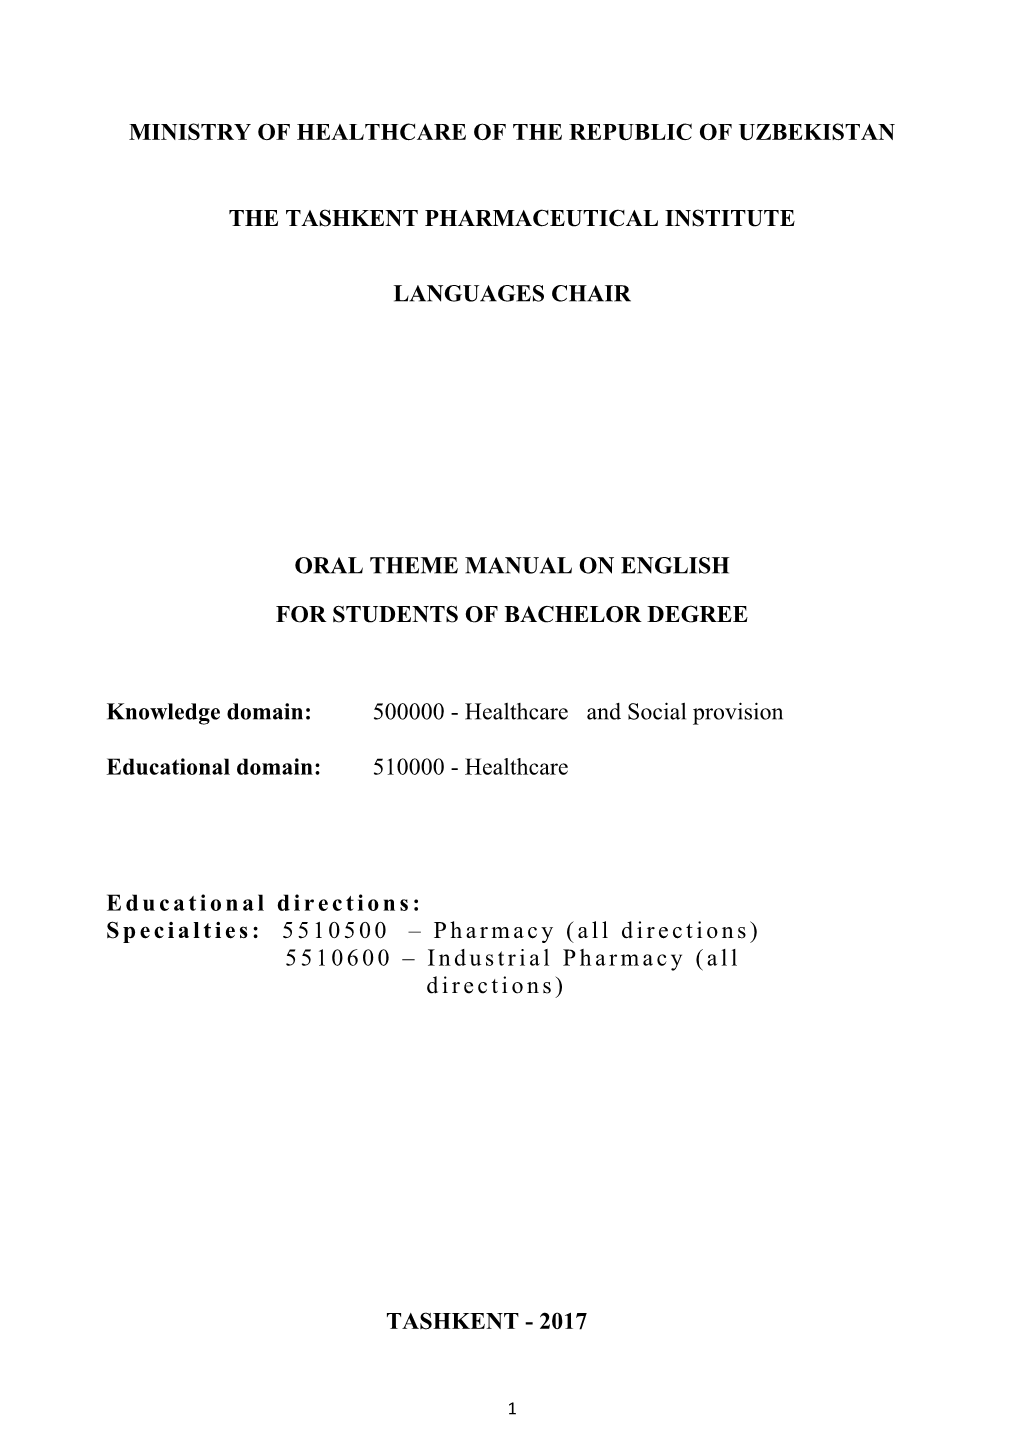 Ministry of Healthcare of the Republic of Uzbekistan the Tashkent Pharmaceutical Institute Languages Chair Oral Theme Manual On